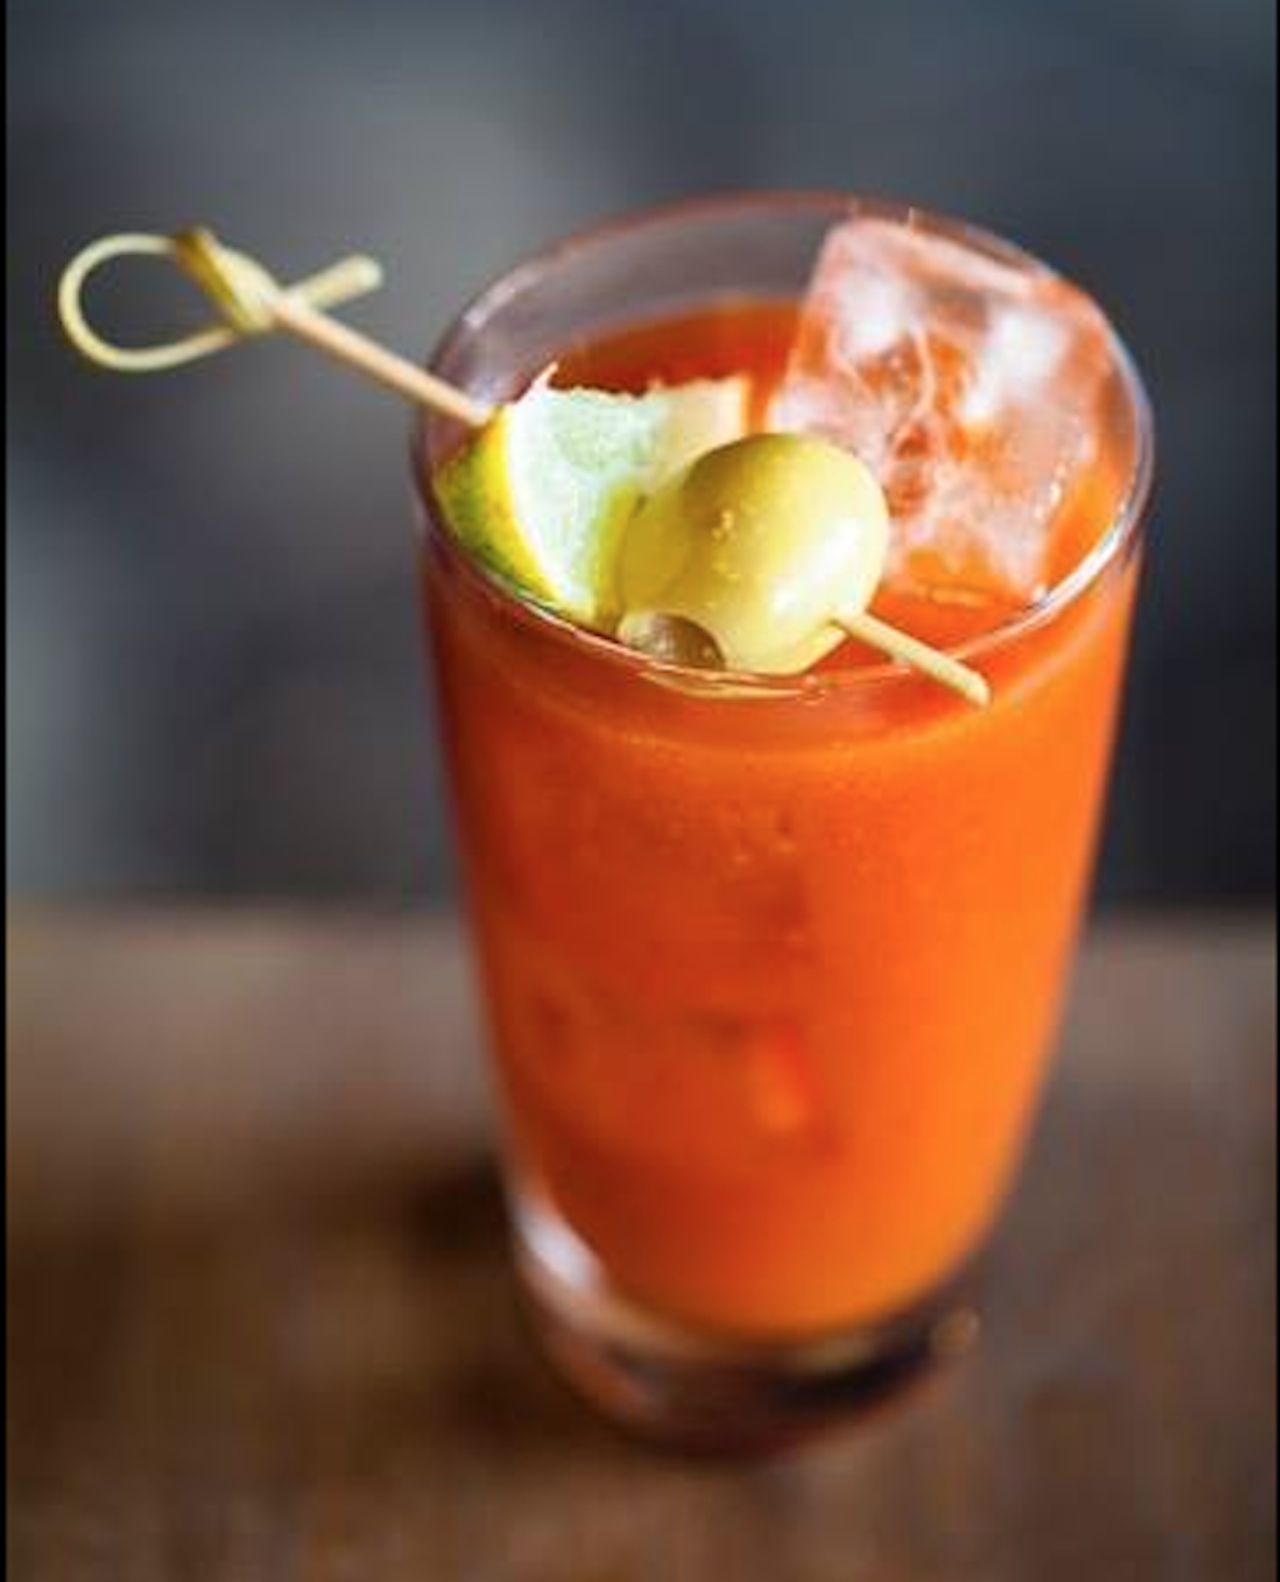 Slate
8323 Sand Lake Road | 407-500-7528
Slate might not be the most appropriate place to be "uncouth," but they make a mean Bloody Mary that's worth just a little public embarrassment. The St. George Green Chile Vodka should work its magic after one or two. Trust us.
Photo via SLATE/Facebook